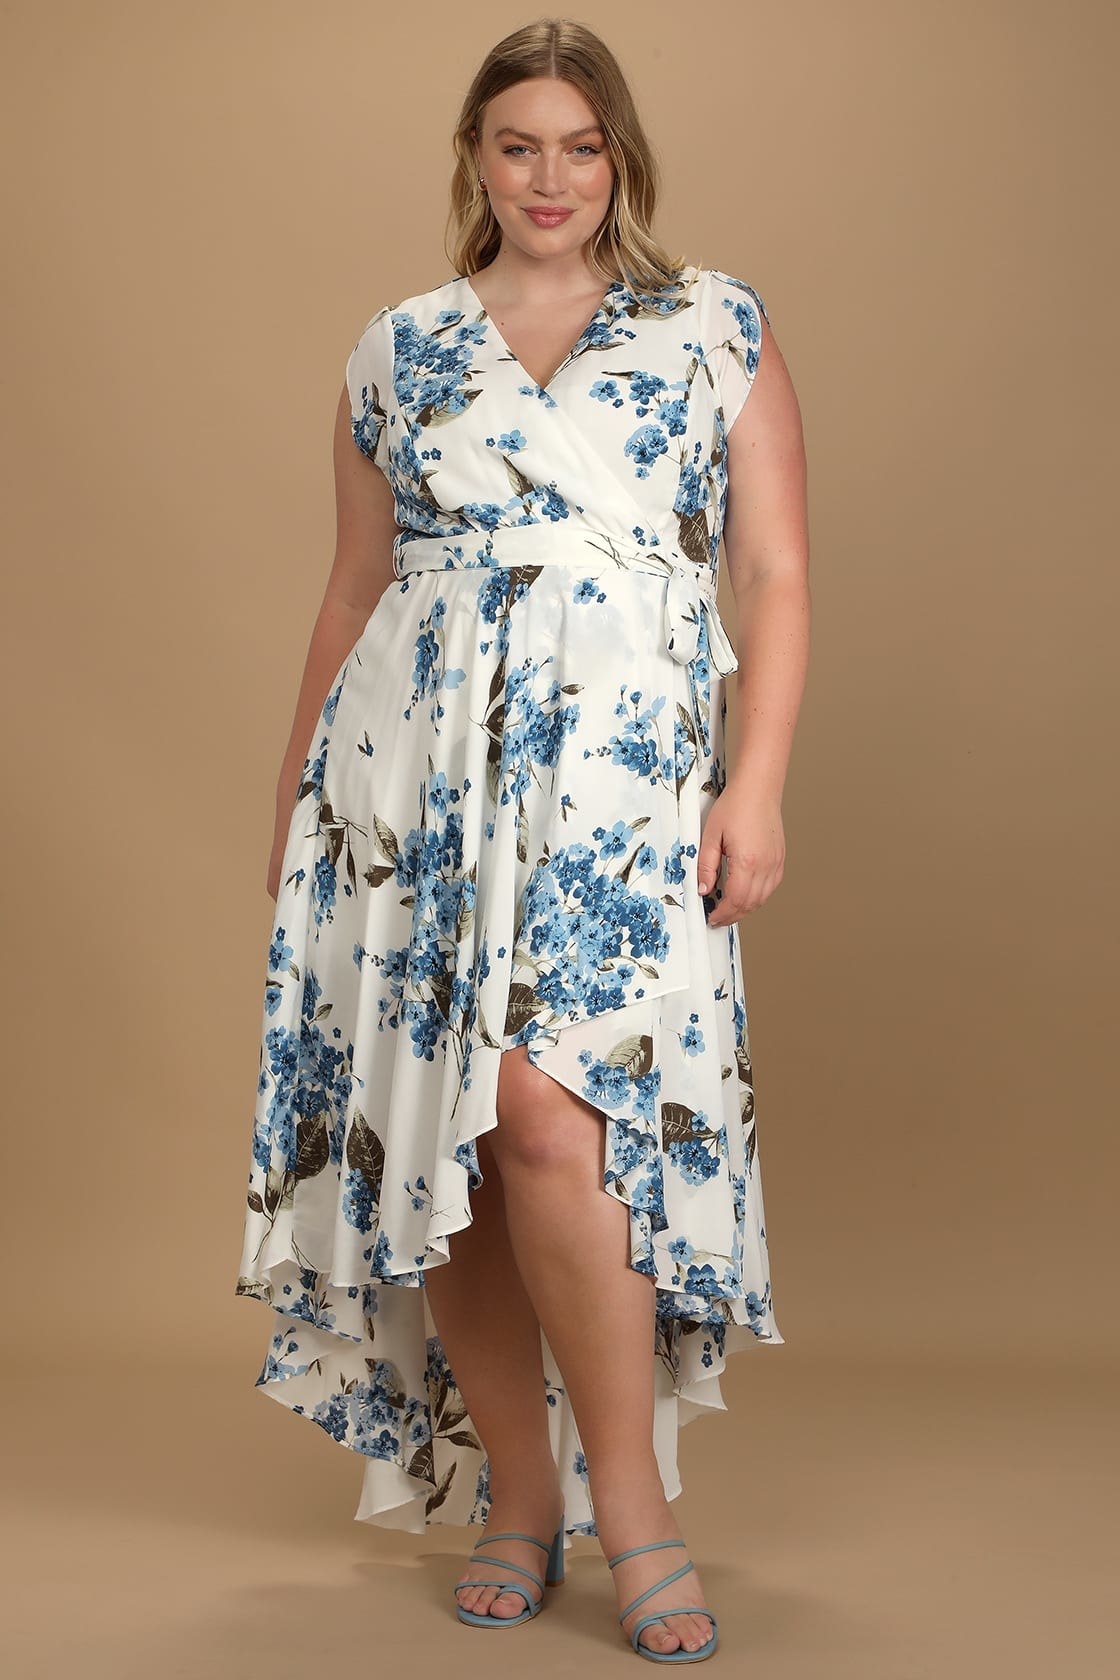 model in white maxi dress with a blue floral pattern, a high-low ruffled skirt, and a waist tie